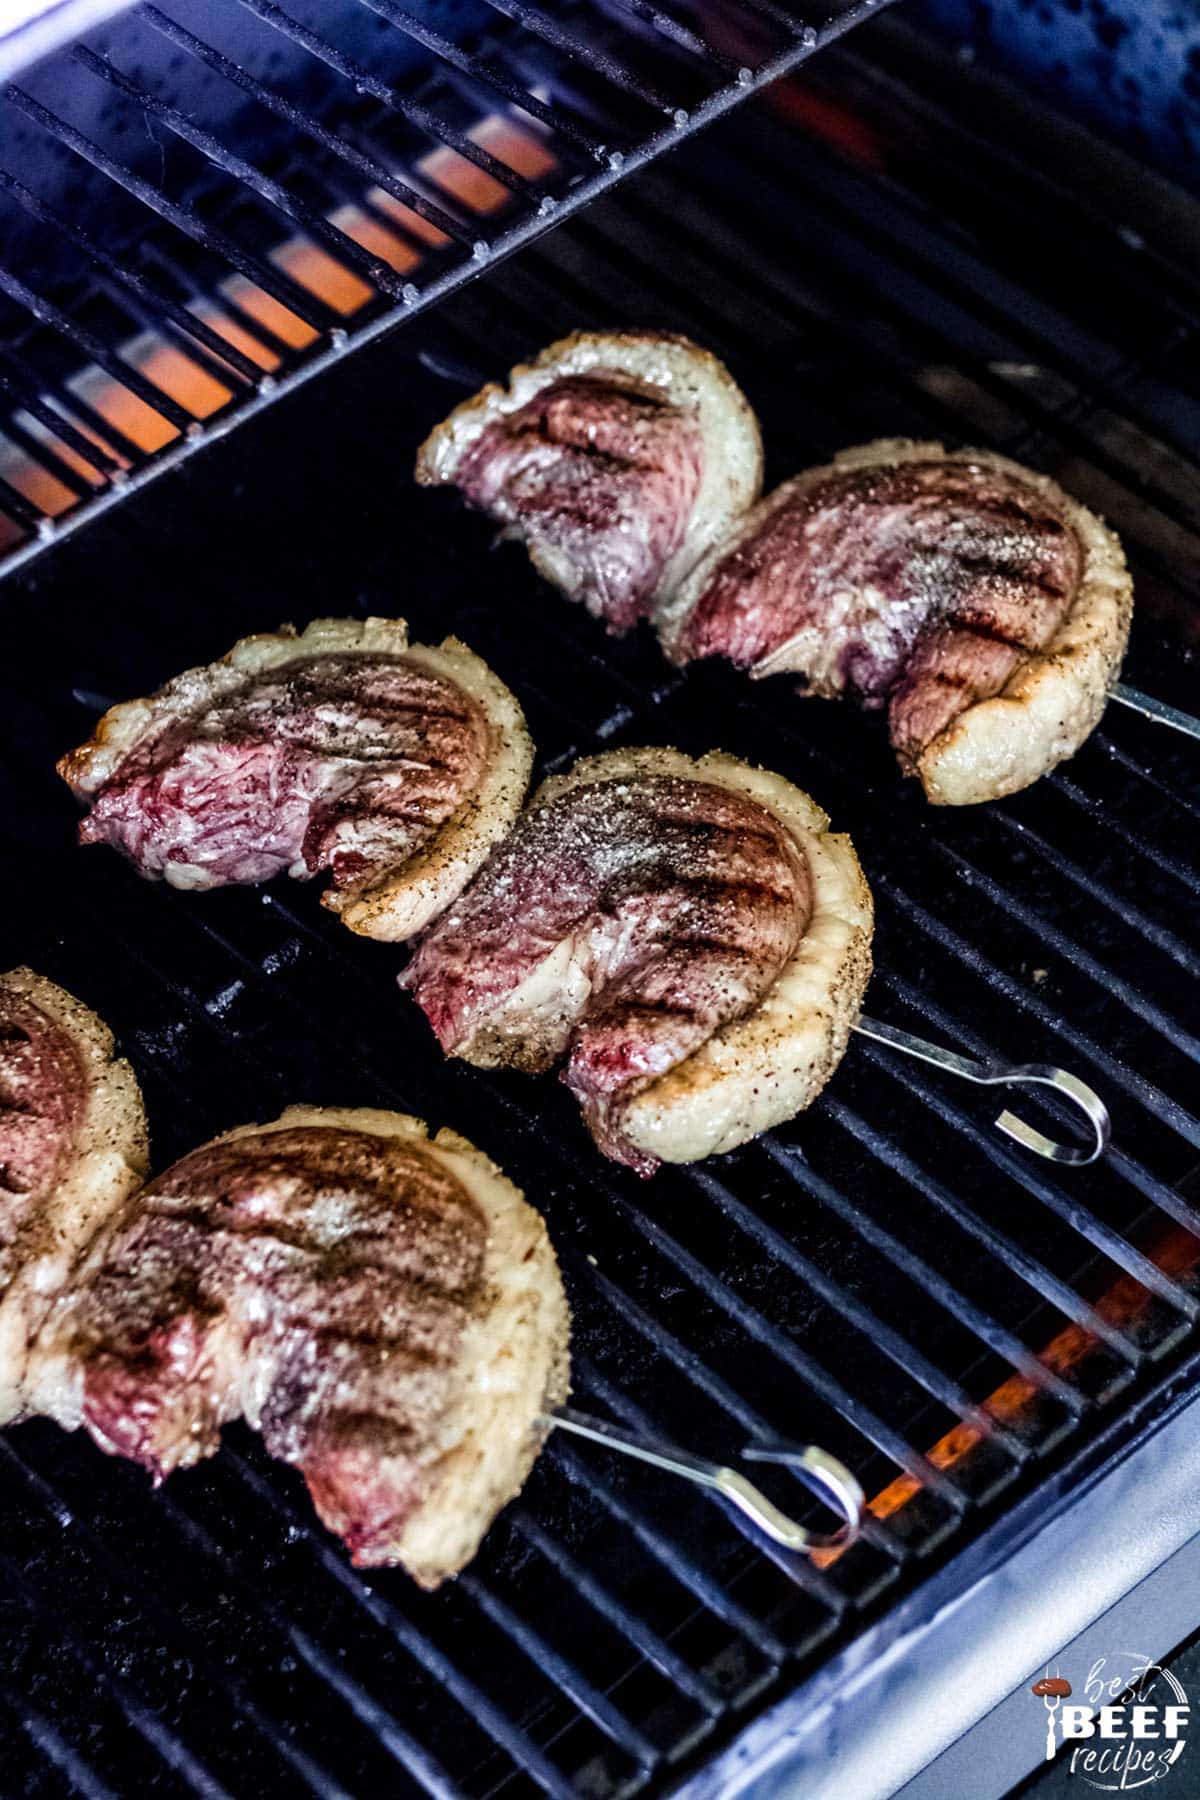 Picanha steaks on the grill